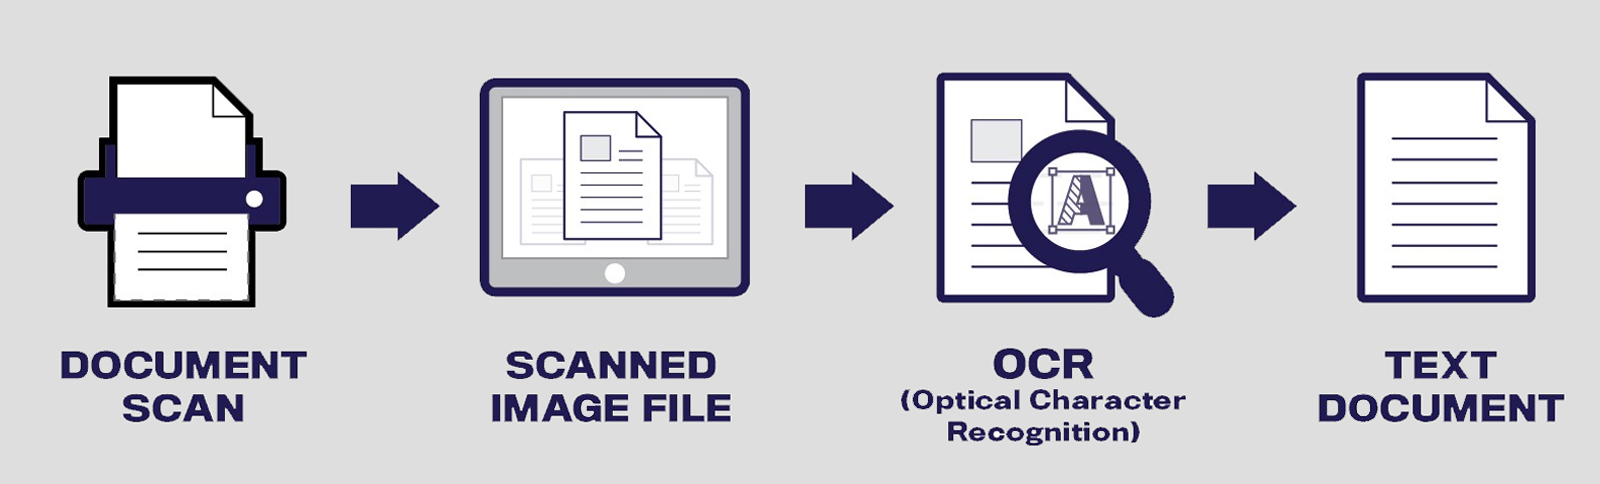 Bulk Document Scanning Service - Digitise Your Records, Document Scanning Solutions in Oxfordshire, Bulk Document Scanning, Paper Records, Image Scanning, Paper Records, Image Scanning Solutions, Local History Archiving, Film Video Audio Scan